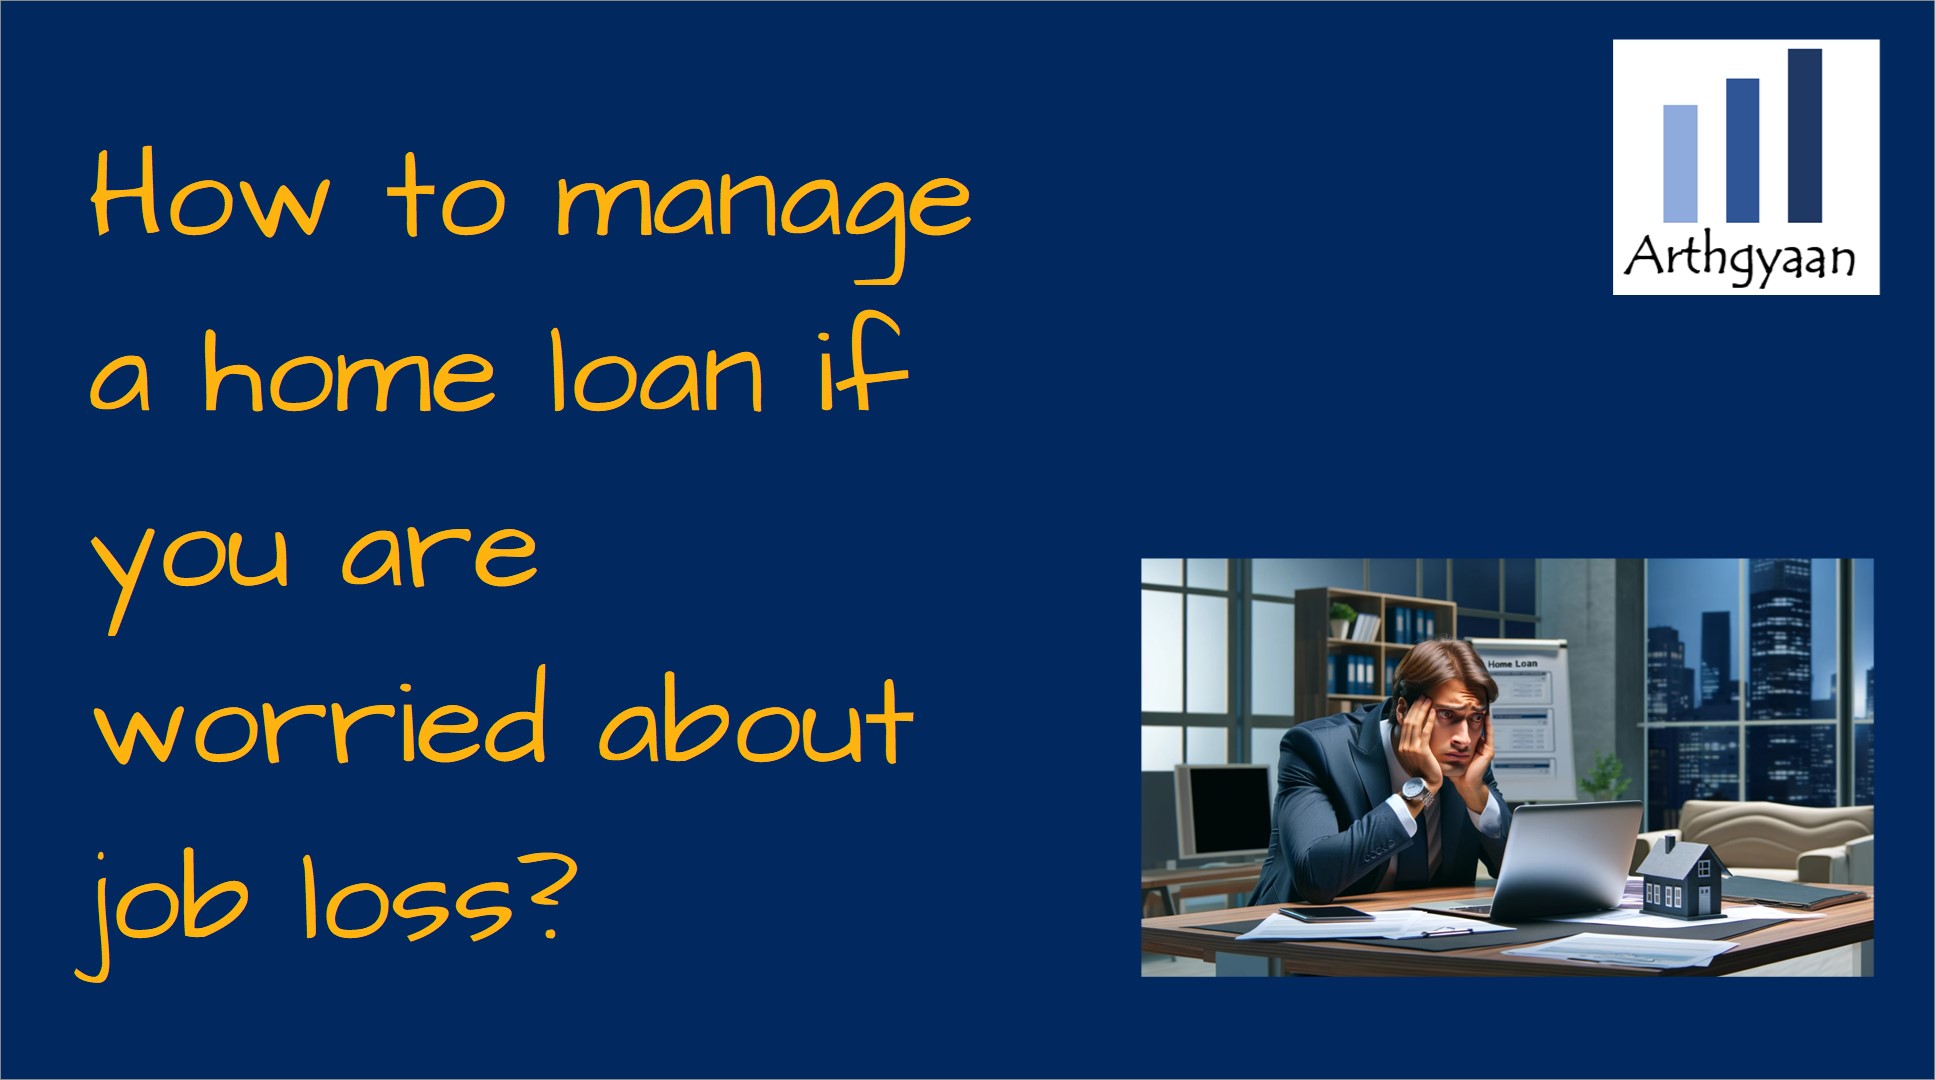 How to manage a home loan if you are worried about job loss?